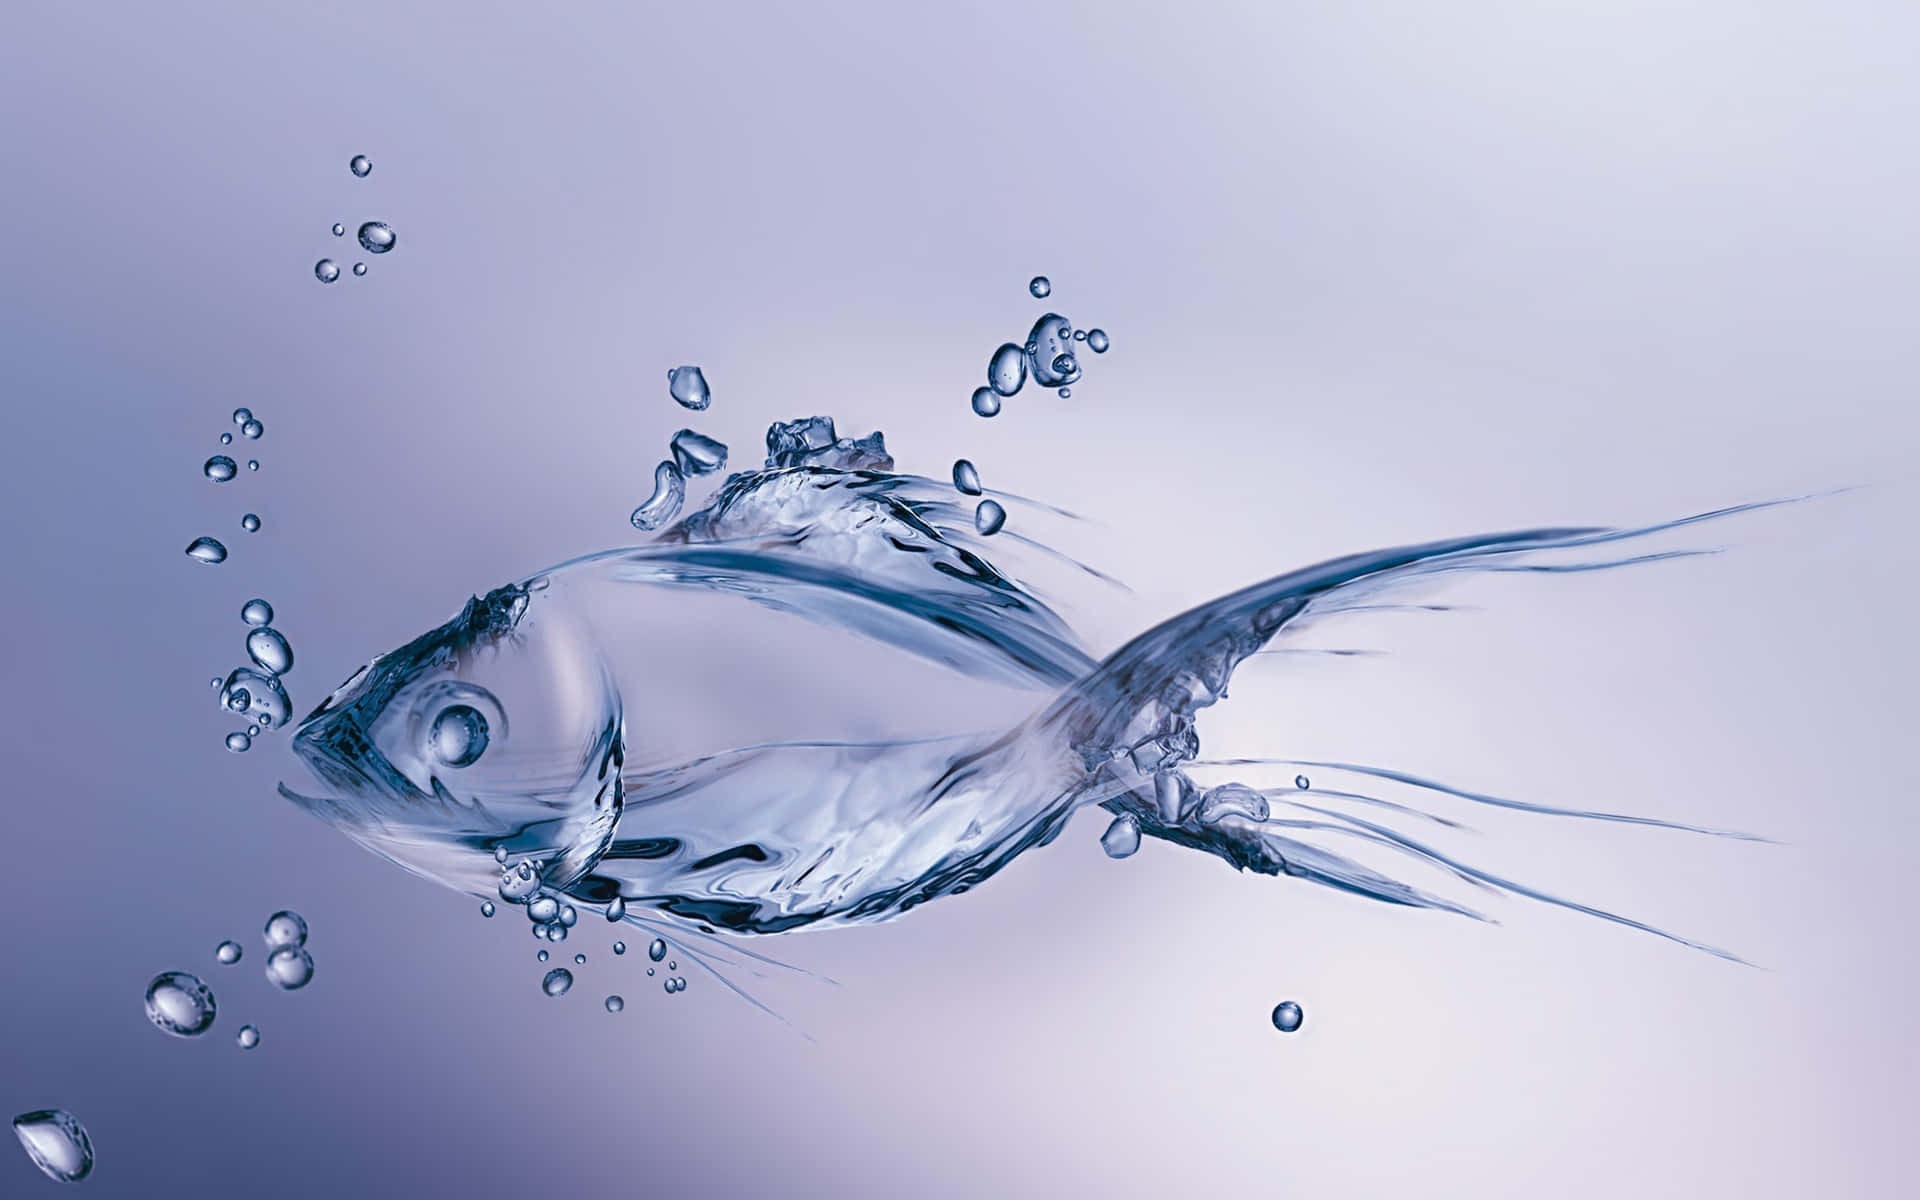 A Fish Is Swimming In Water With Bubbles